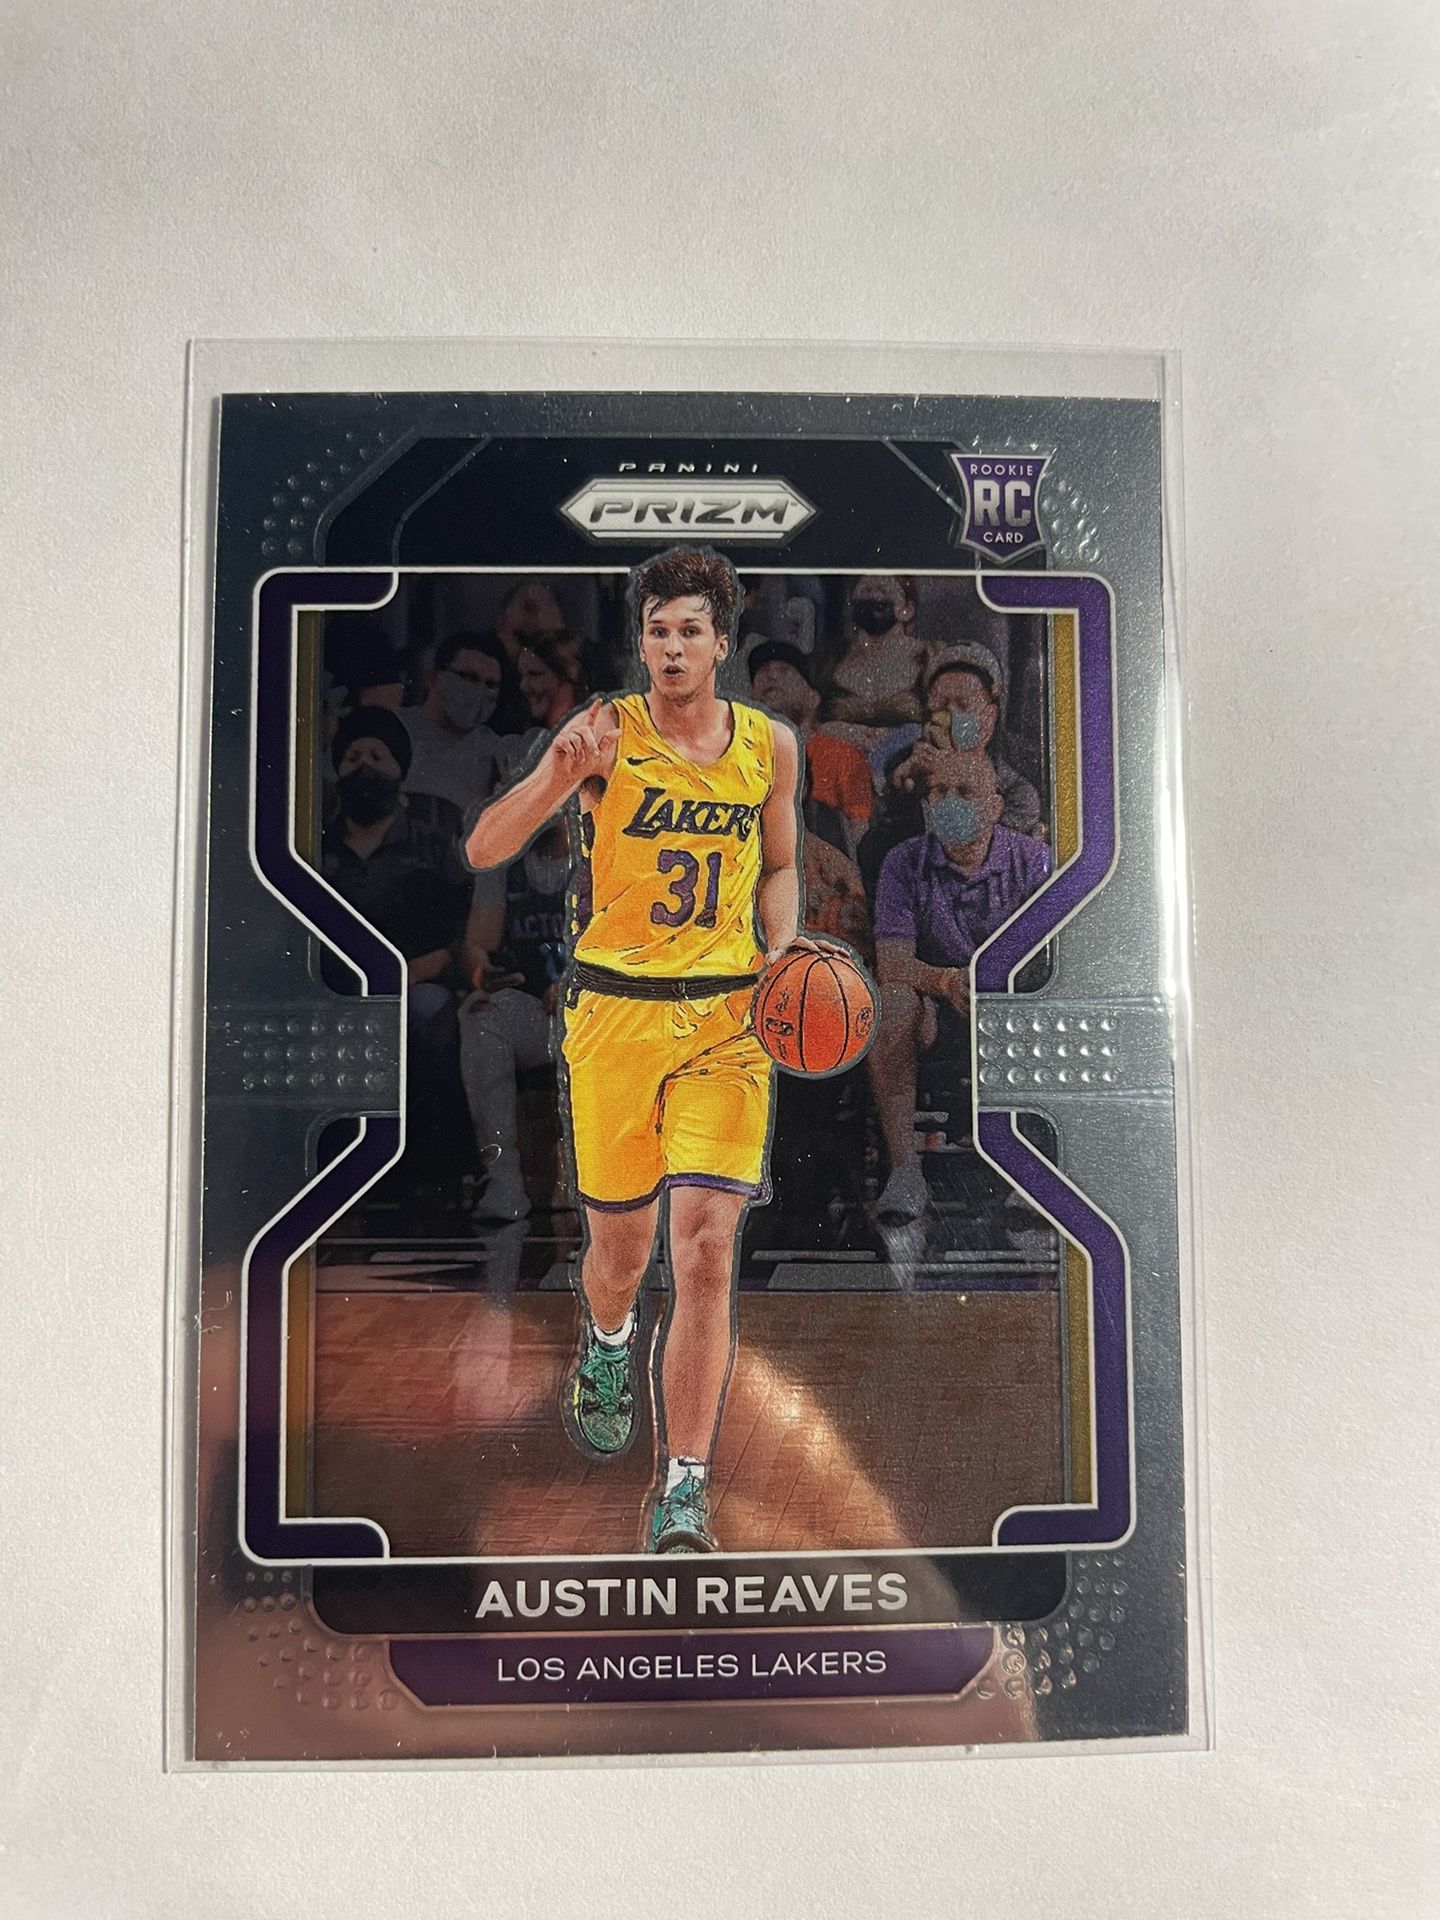 Lakers: Austin Reaves Autographs a Very Unique Item for a Fan - All Lakers